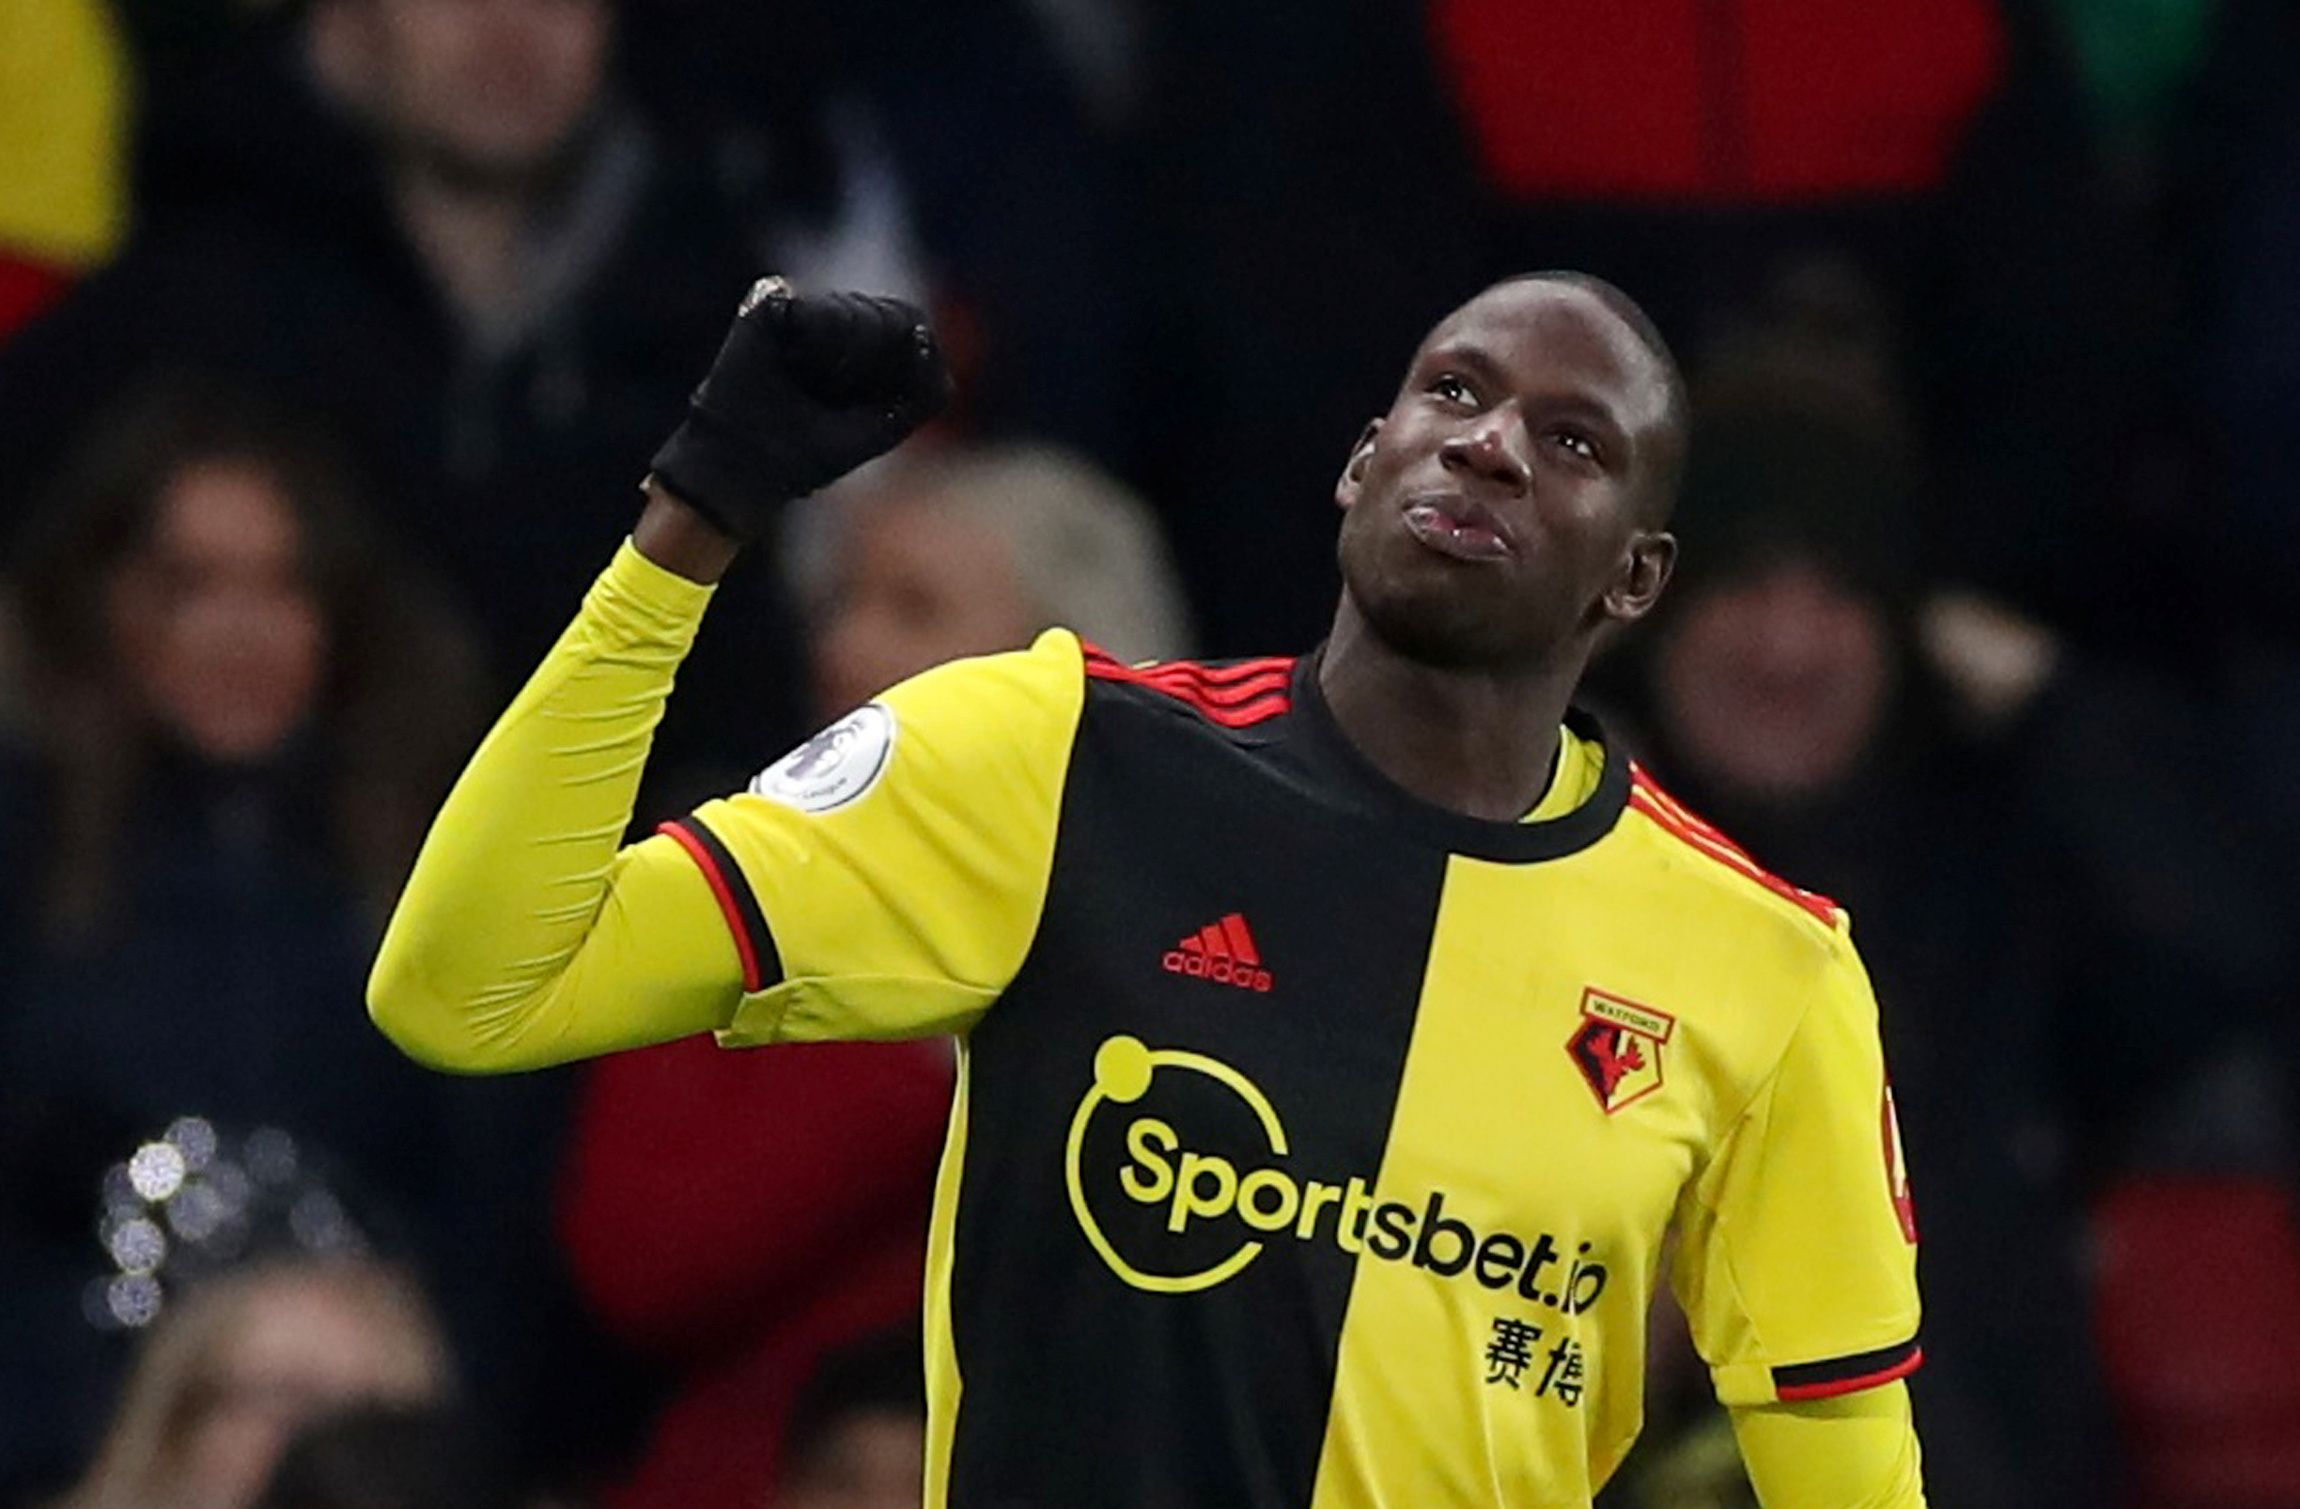 Soccer Football - Premier League - Watford v Wolverhampton Wanderers - Vicarage Road, Watford, Britain - January 1, 2020  Watford's Abdoulaye Doucoure celebrates scoring their second goal   REUTERS/David Klein  EDITORIAL USE ONLY. No use with unauthorized audio, video, data, fixture lists, club/league logos or 